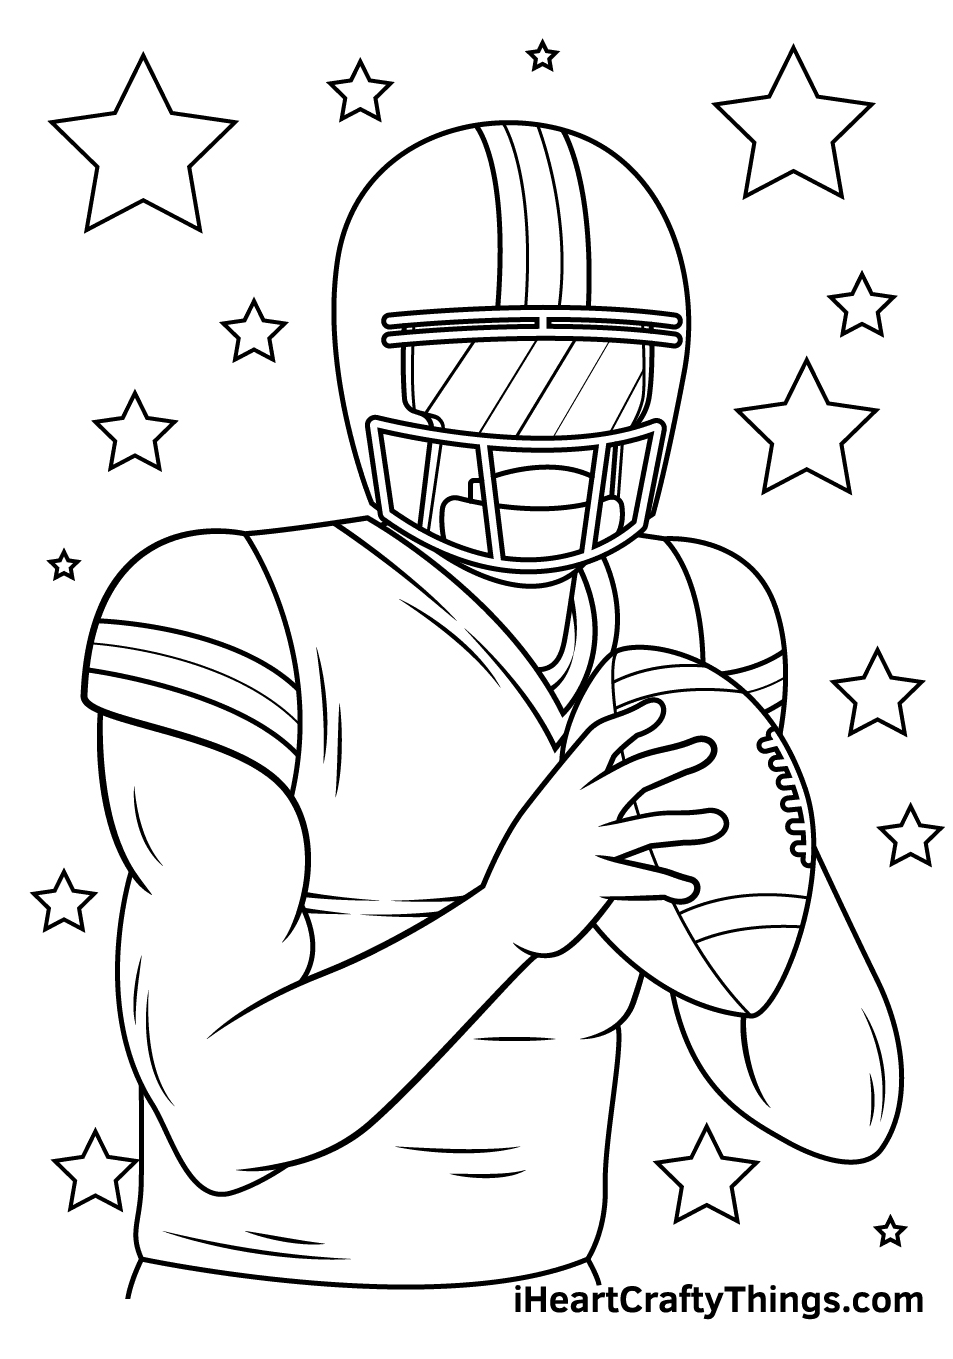 A Football Player holding the Ball Coloring Page